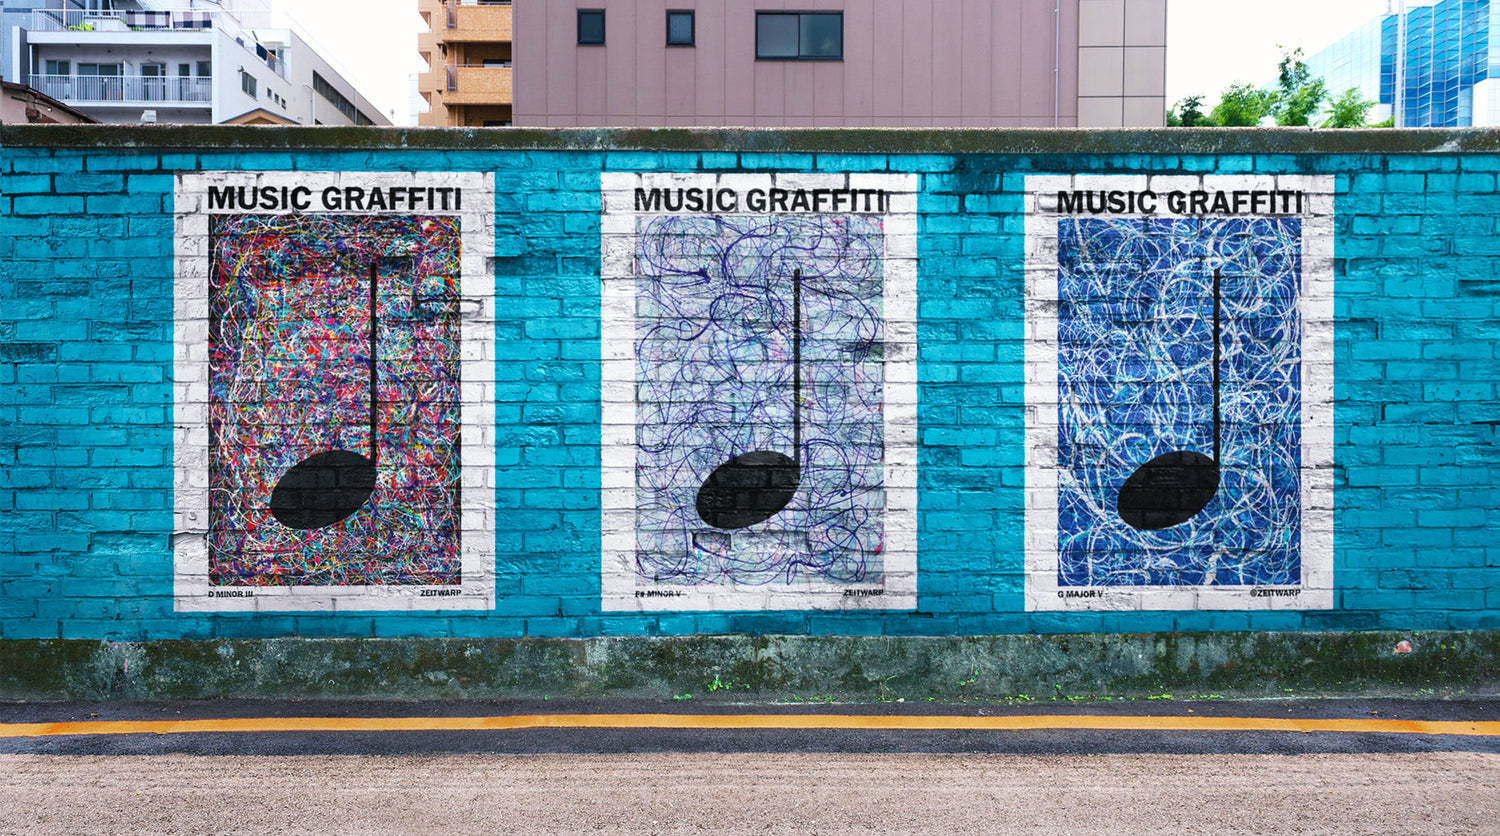 Street Art Mural with three Music Graffiti paintings on a turquoise wall in a city street